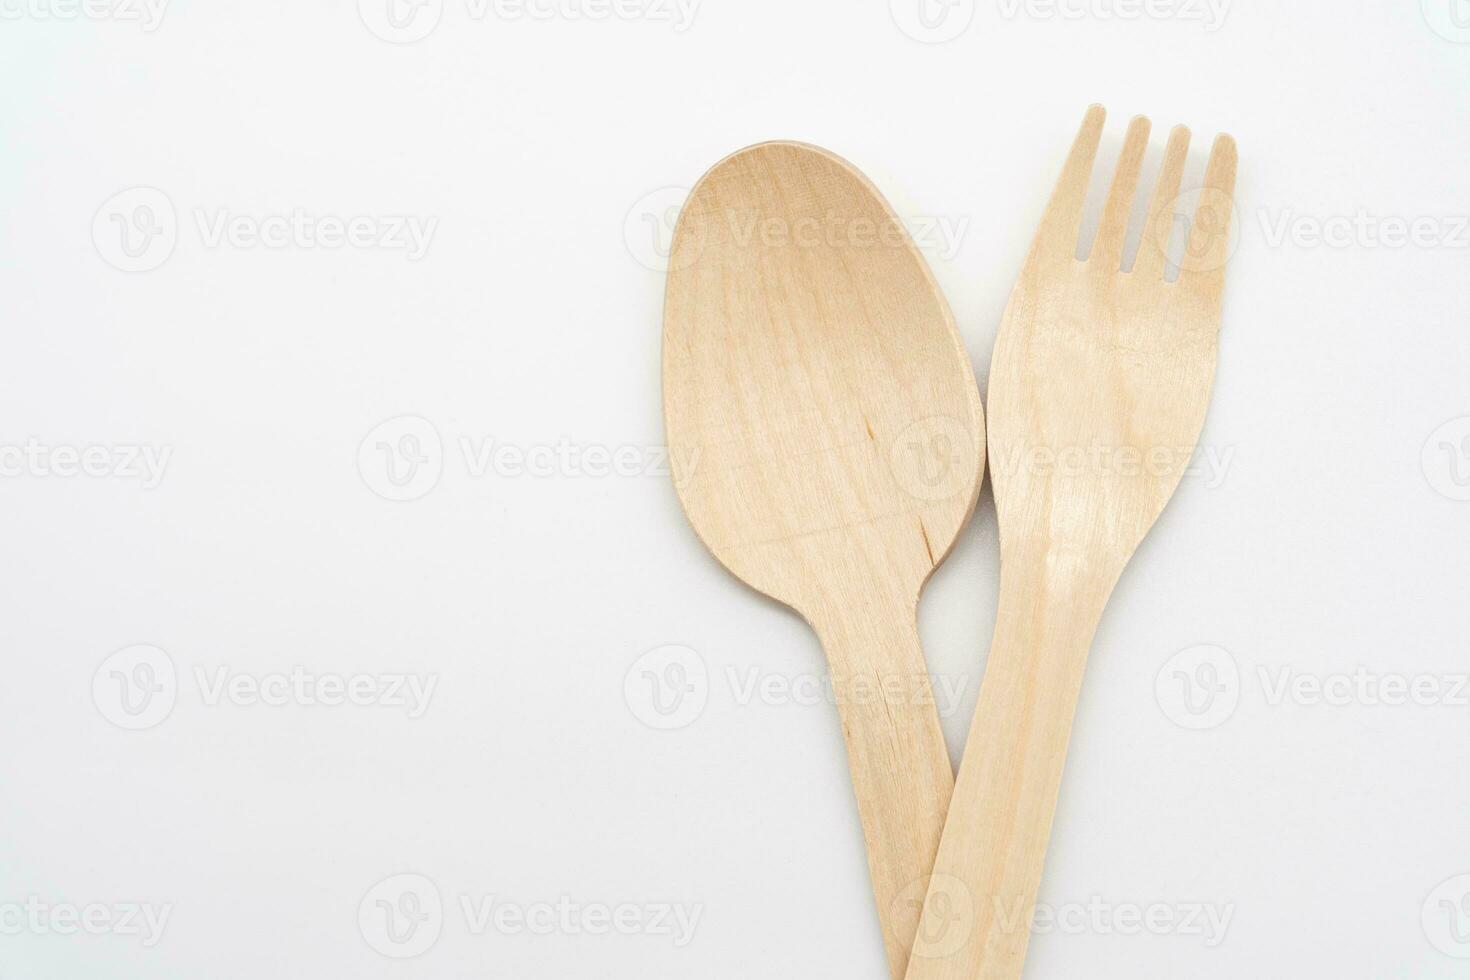 Wooden Cutlery, Eco Tableware, Disposable Cutlery, Recycle. Eco food packaging concept, zero waste paper, sustainability. photo